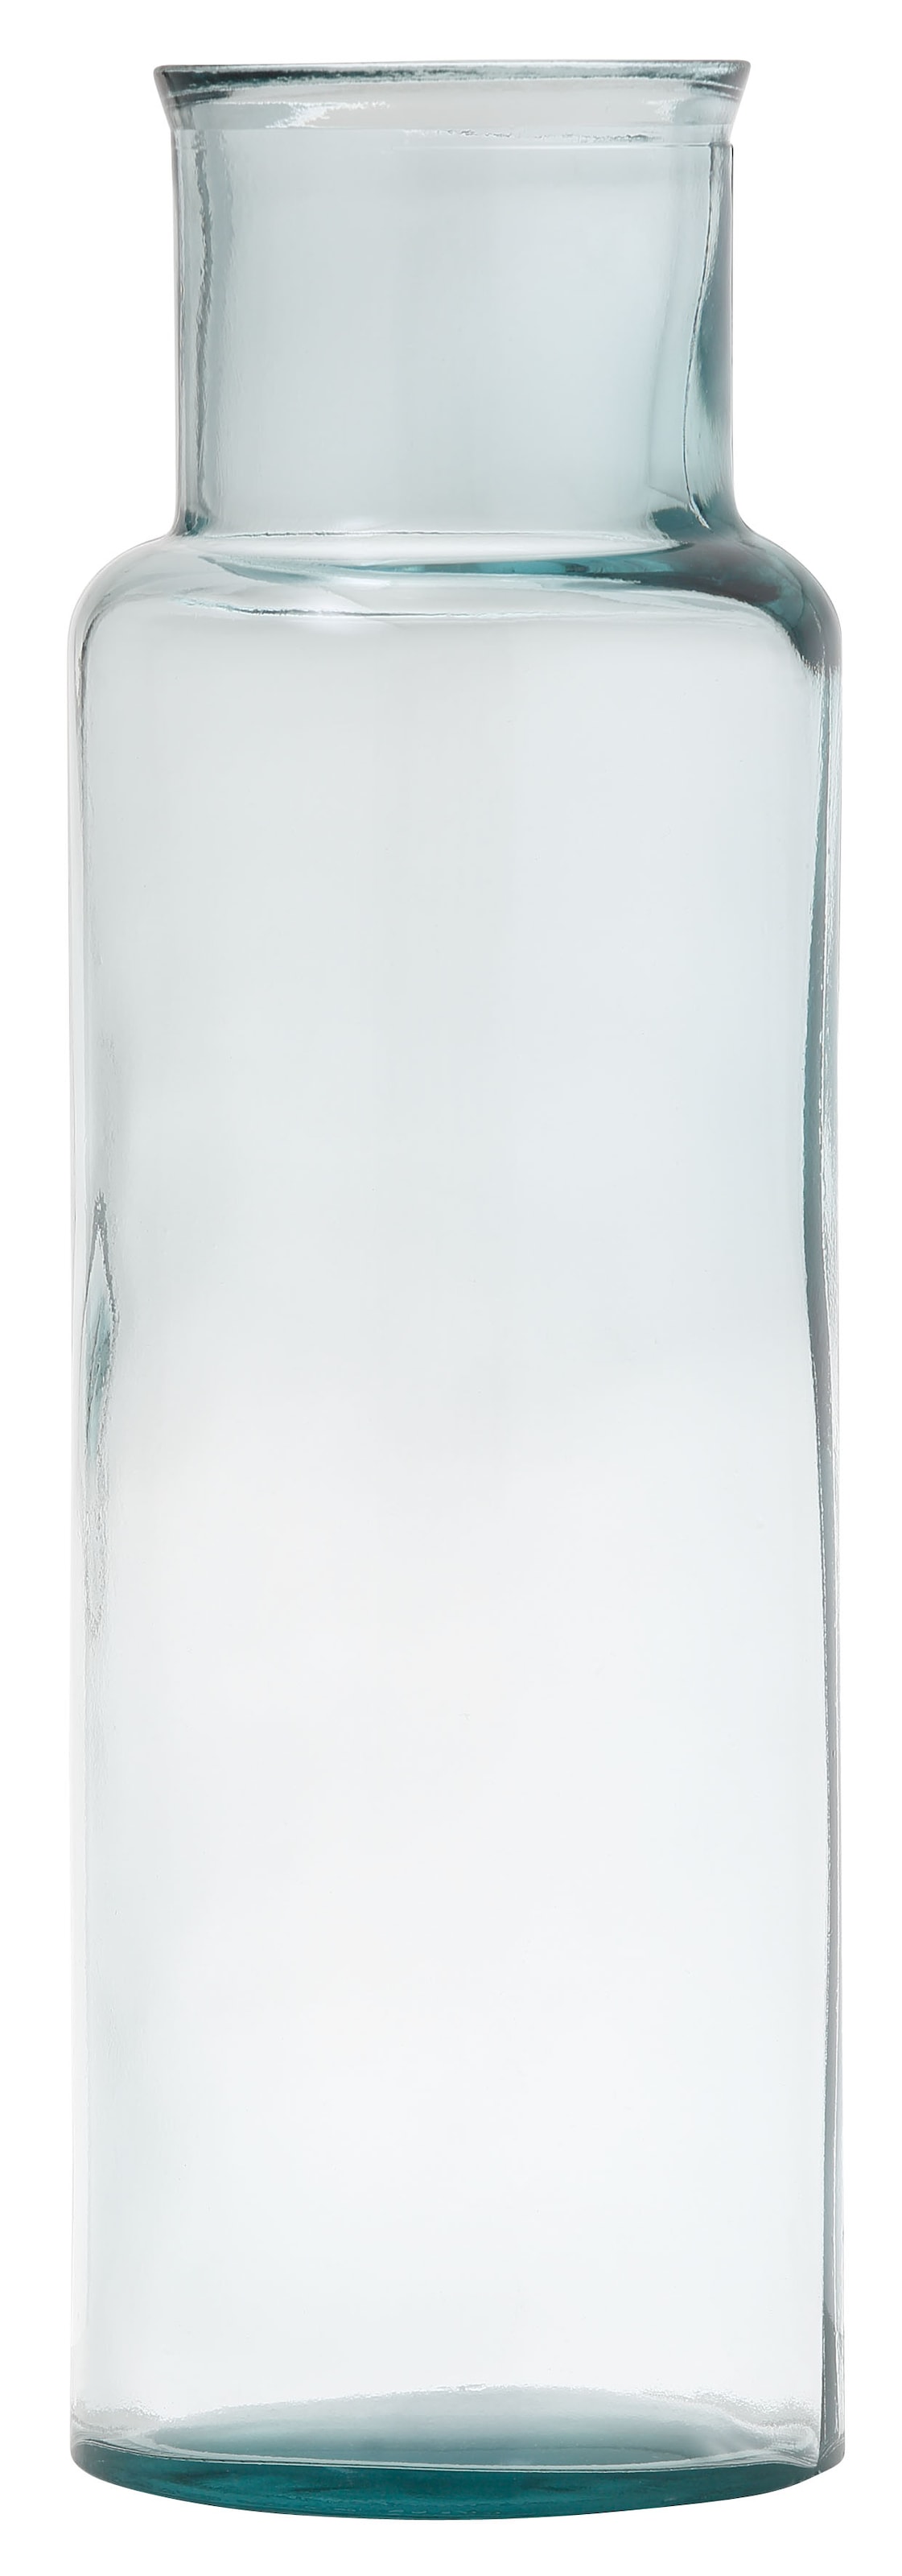 recyceltem bei St.), (1 andas ca. Bodenvase Glas, OTTO Höhe »Aage«, cm 45 aus